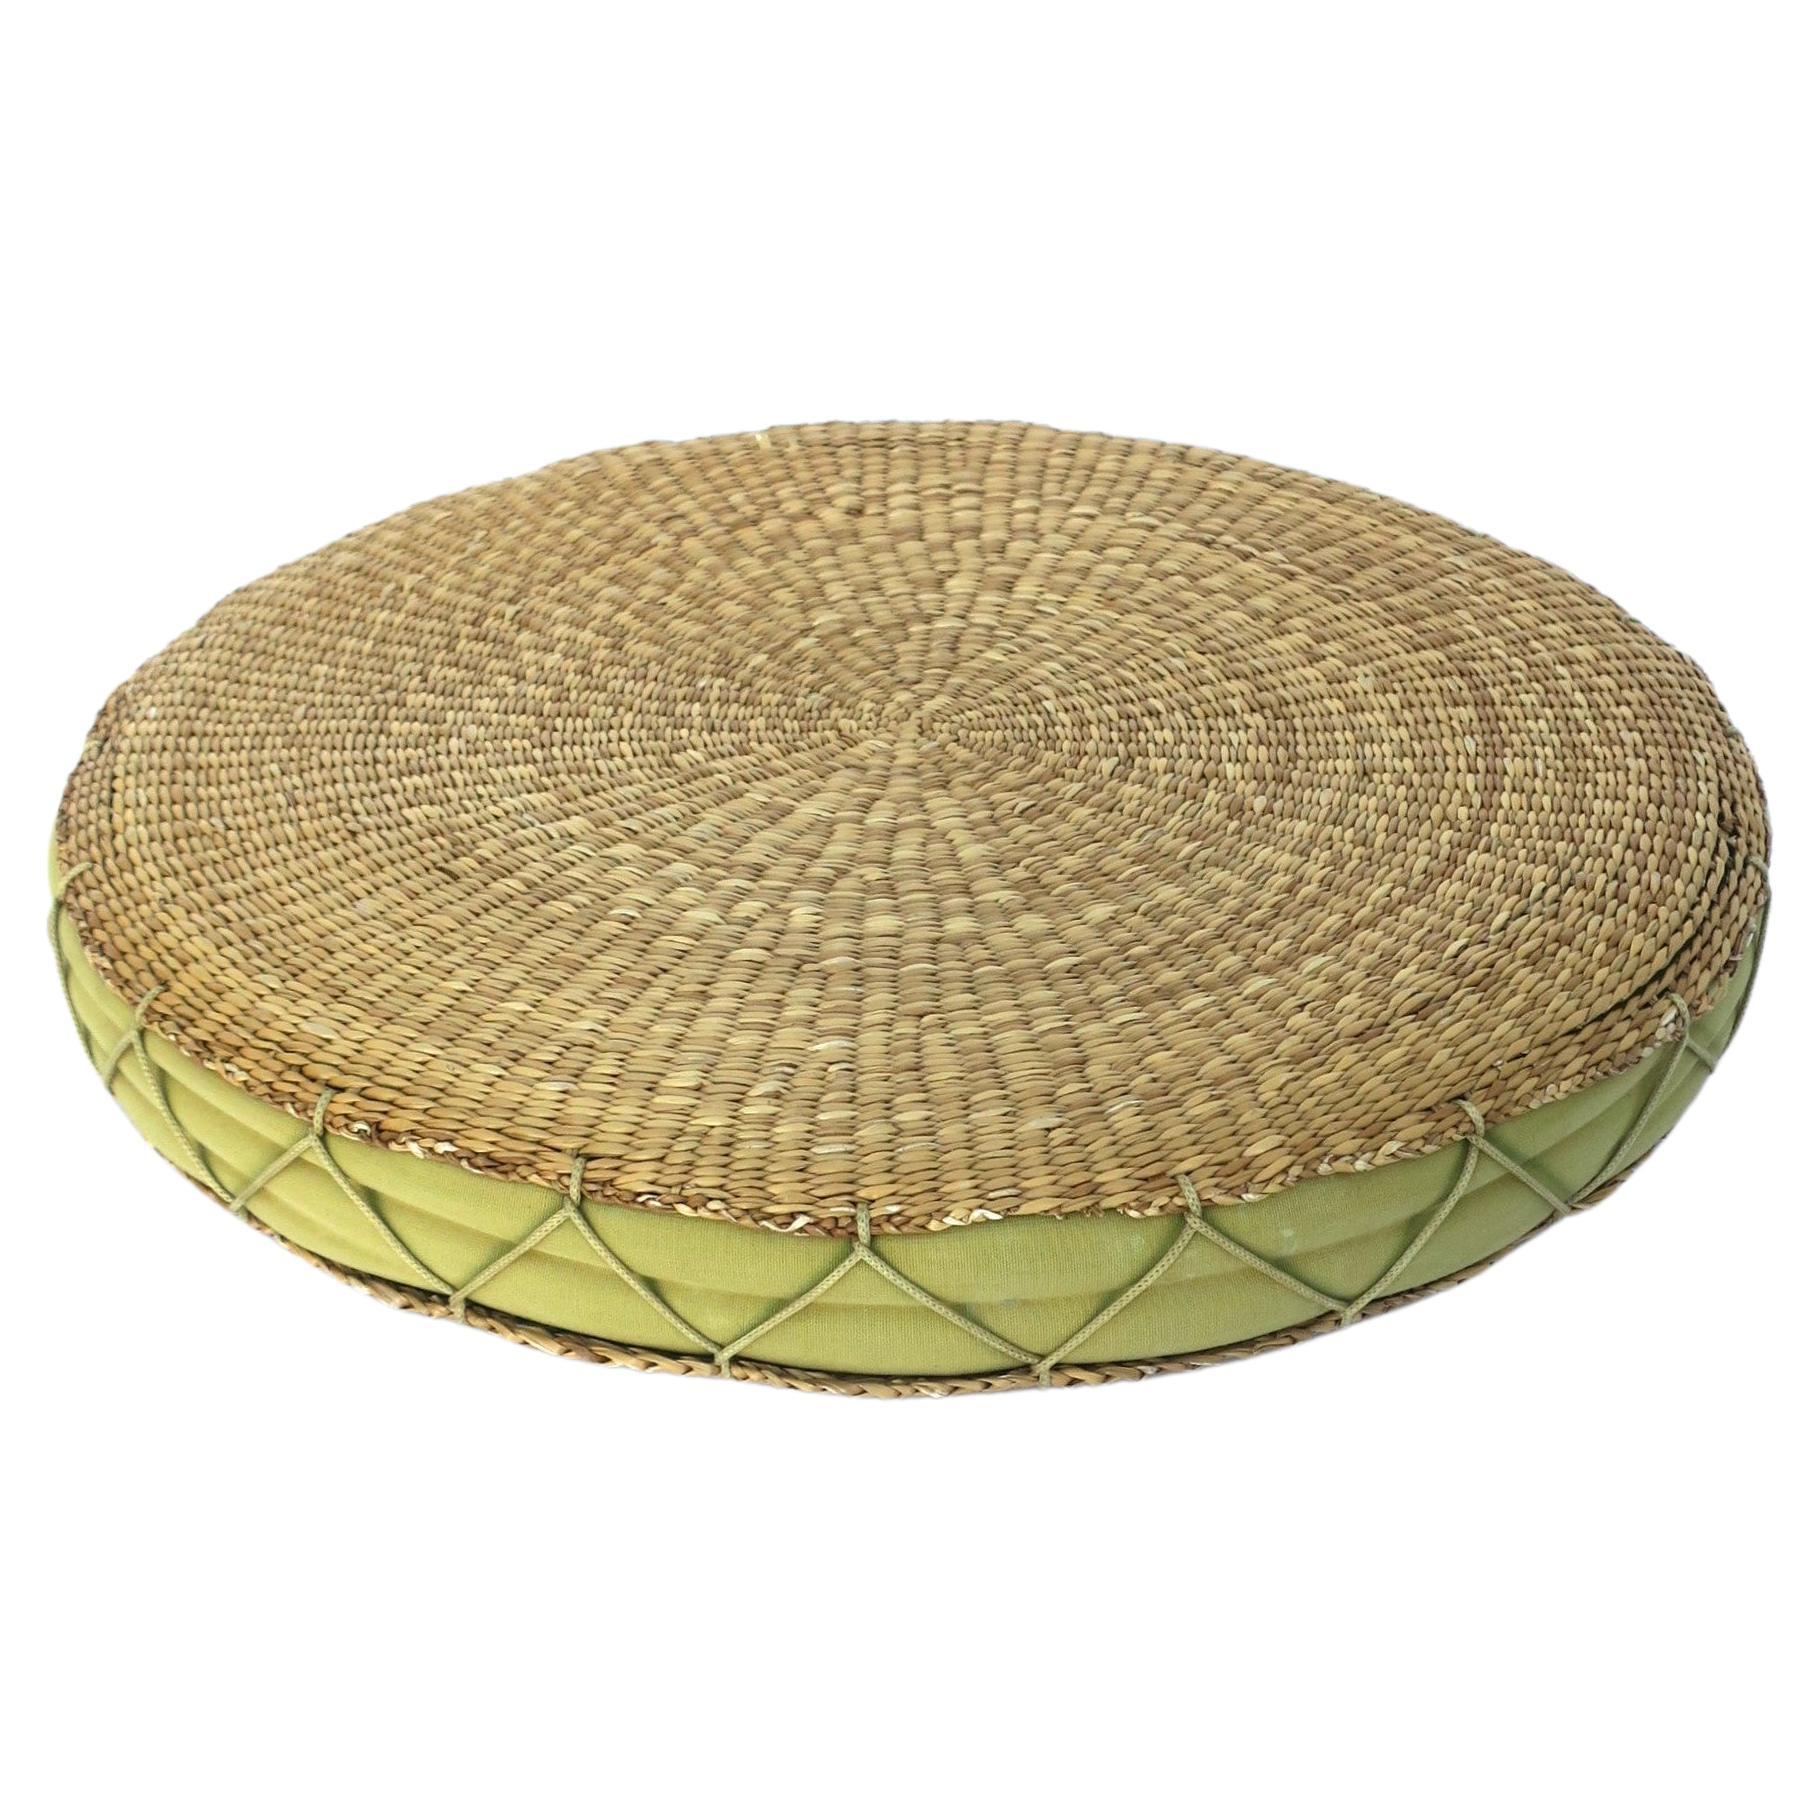 Wicker Seat or Floor Cushion, Green and Tan For Sale